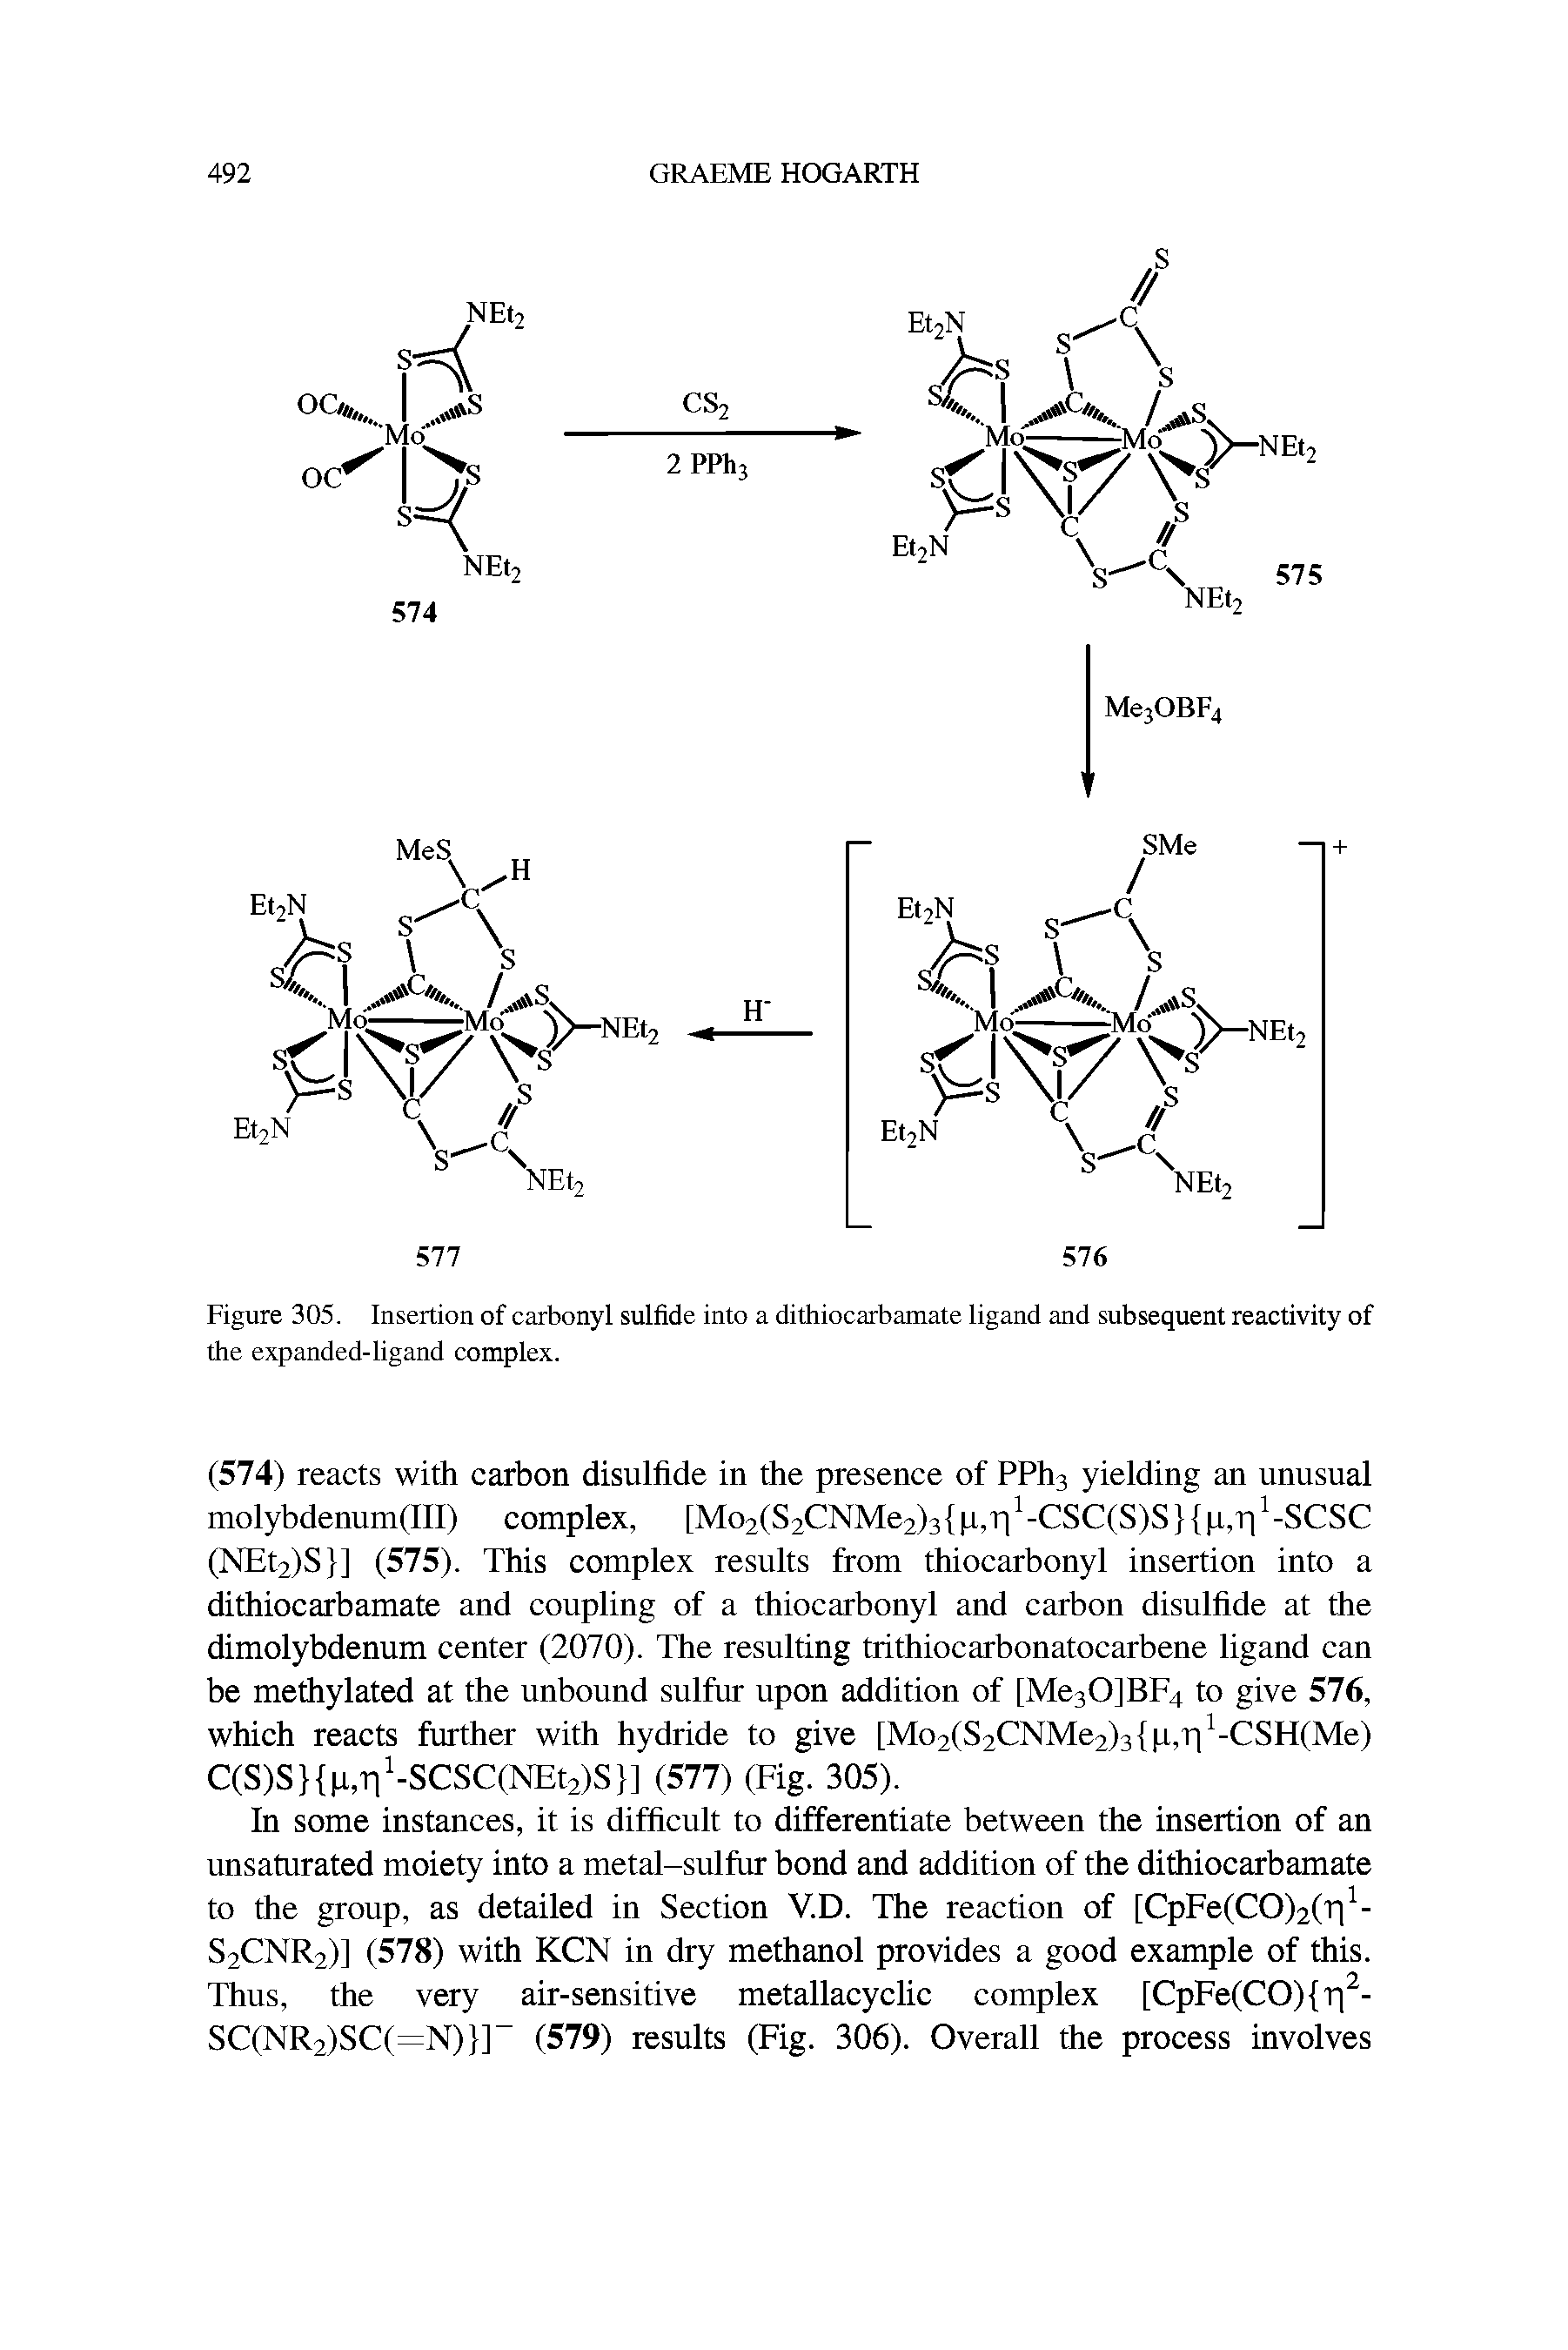 Figure 305. Insertion of carbonyl sulfide into a dithiocarbamate ligand and subsequent reactivity of the expanded-ligand complex.